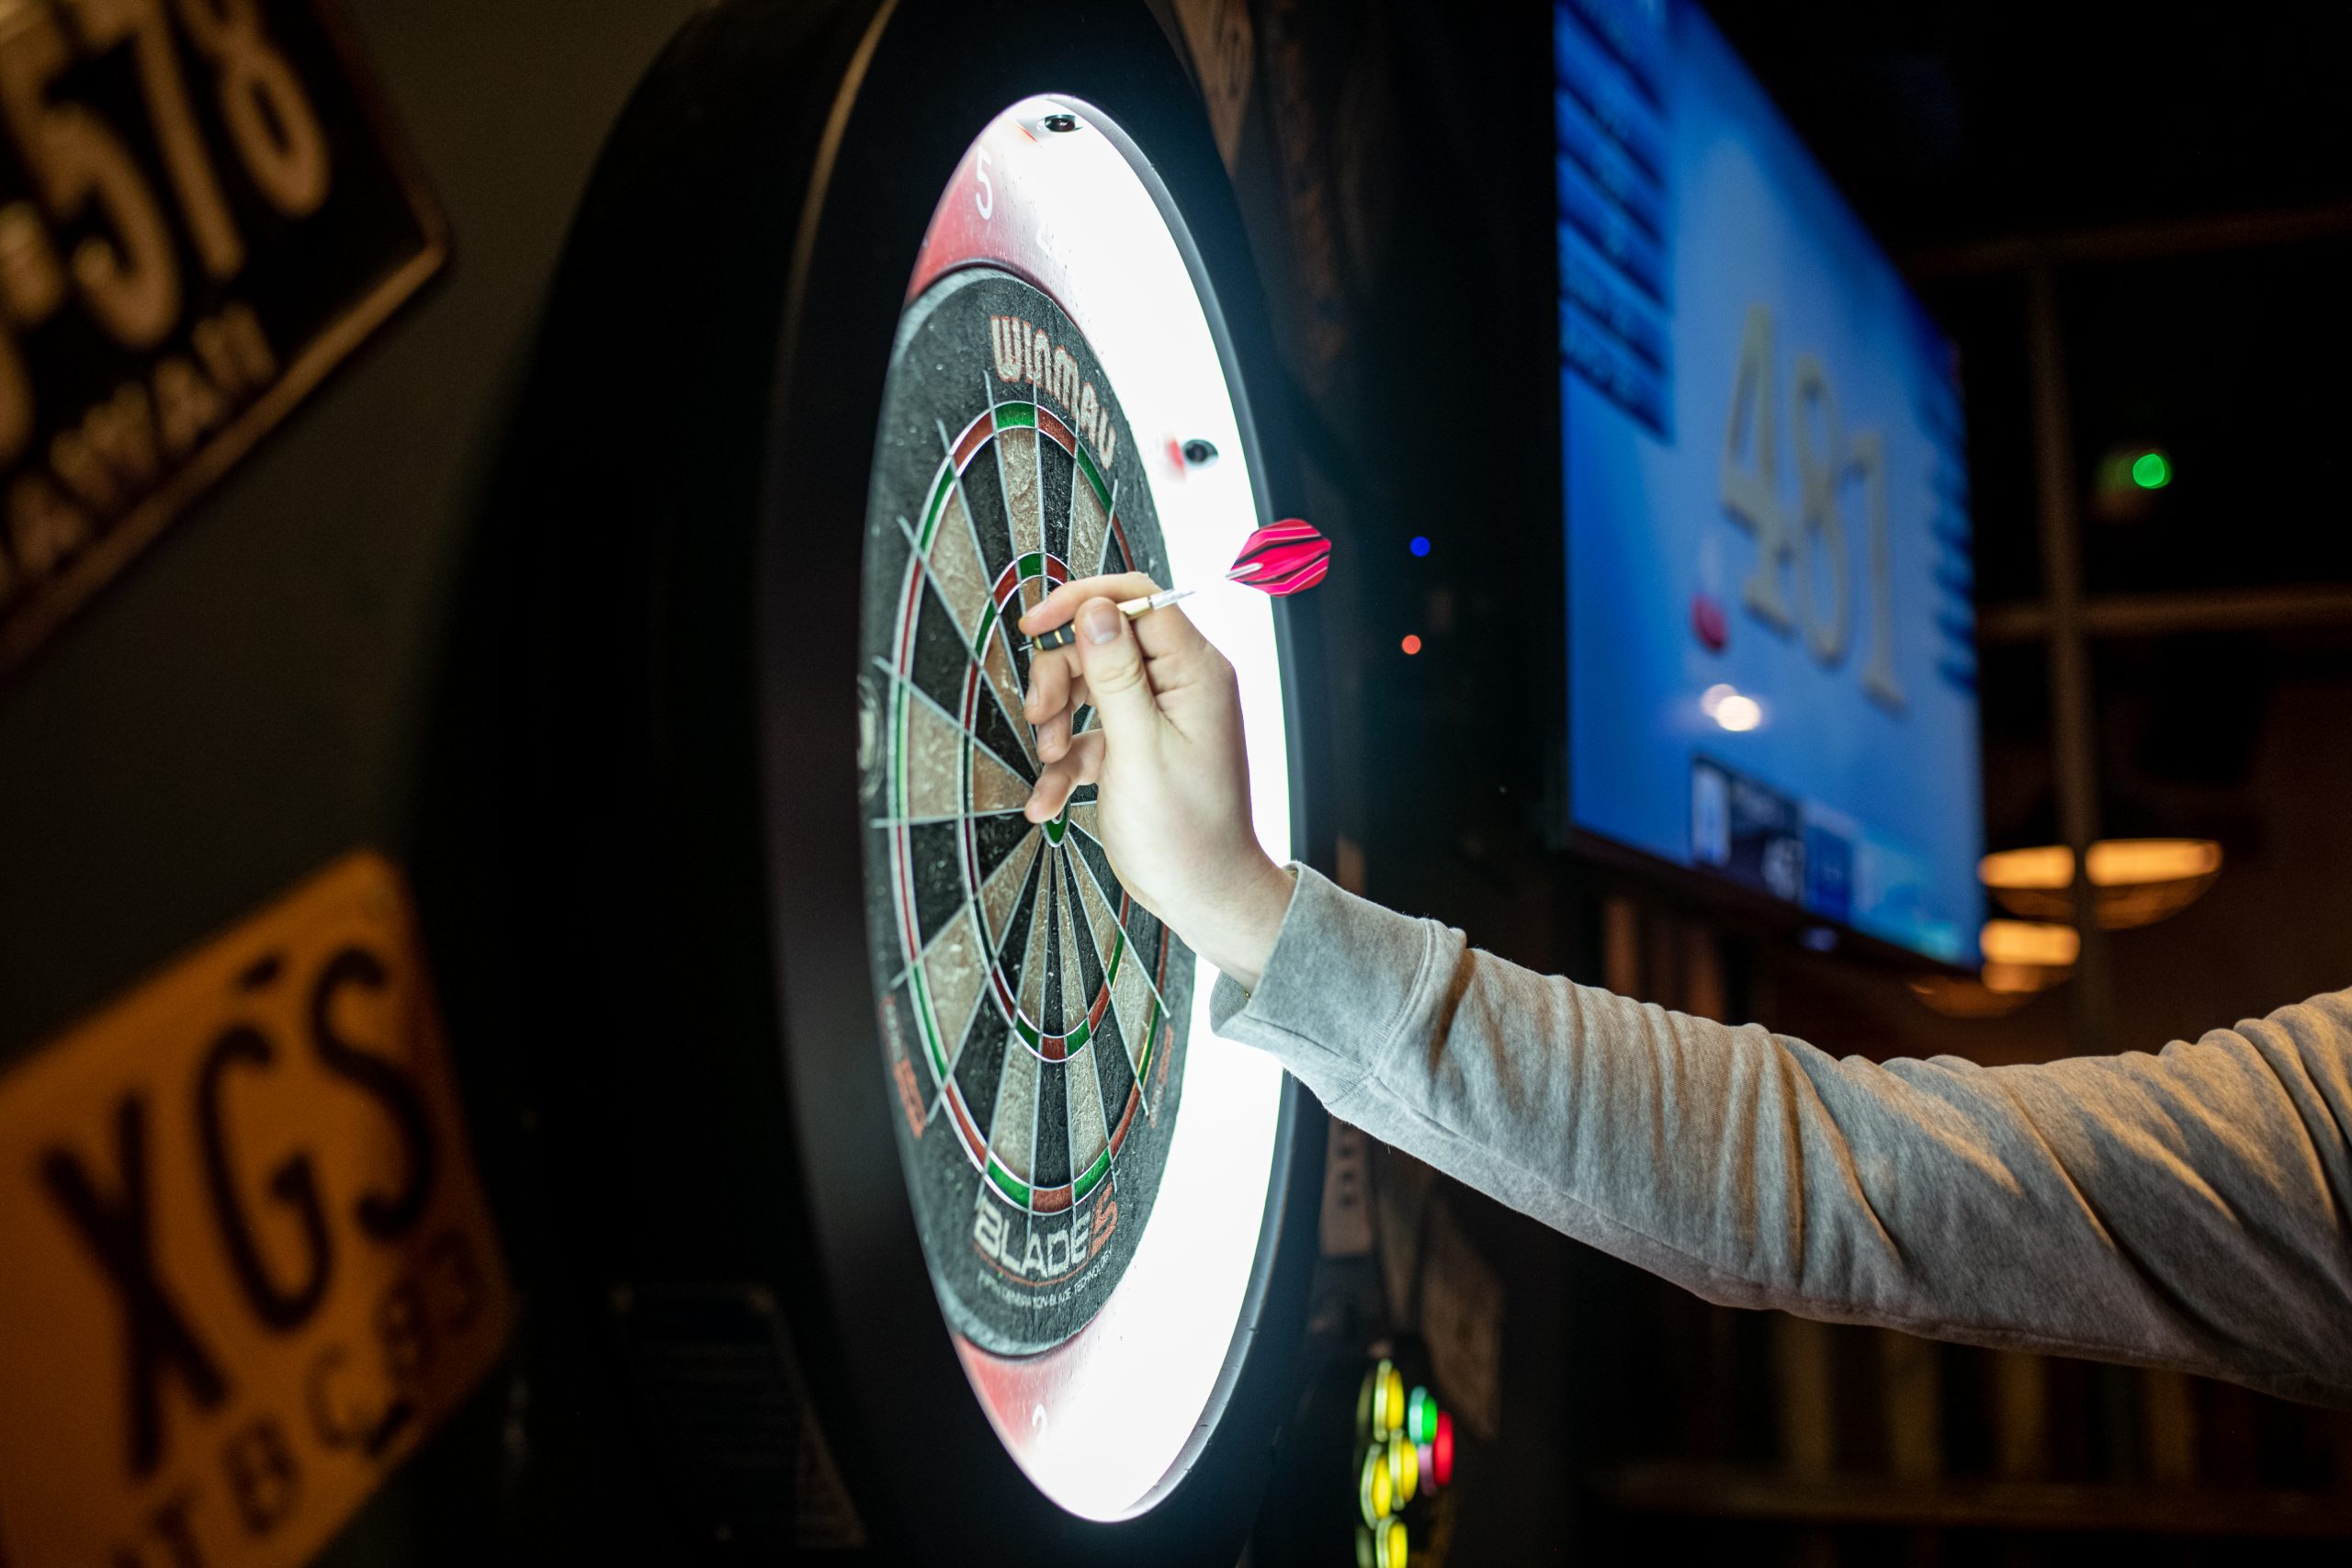 Enjoy a game of darts with friends at Firepit bars